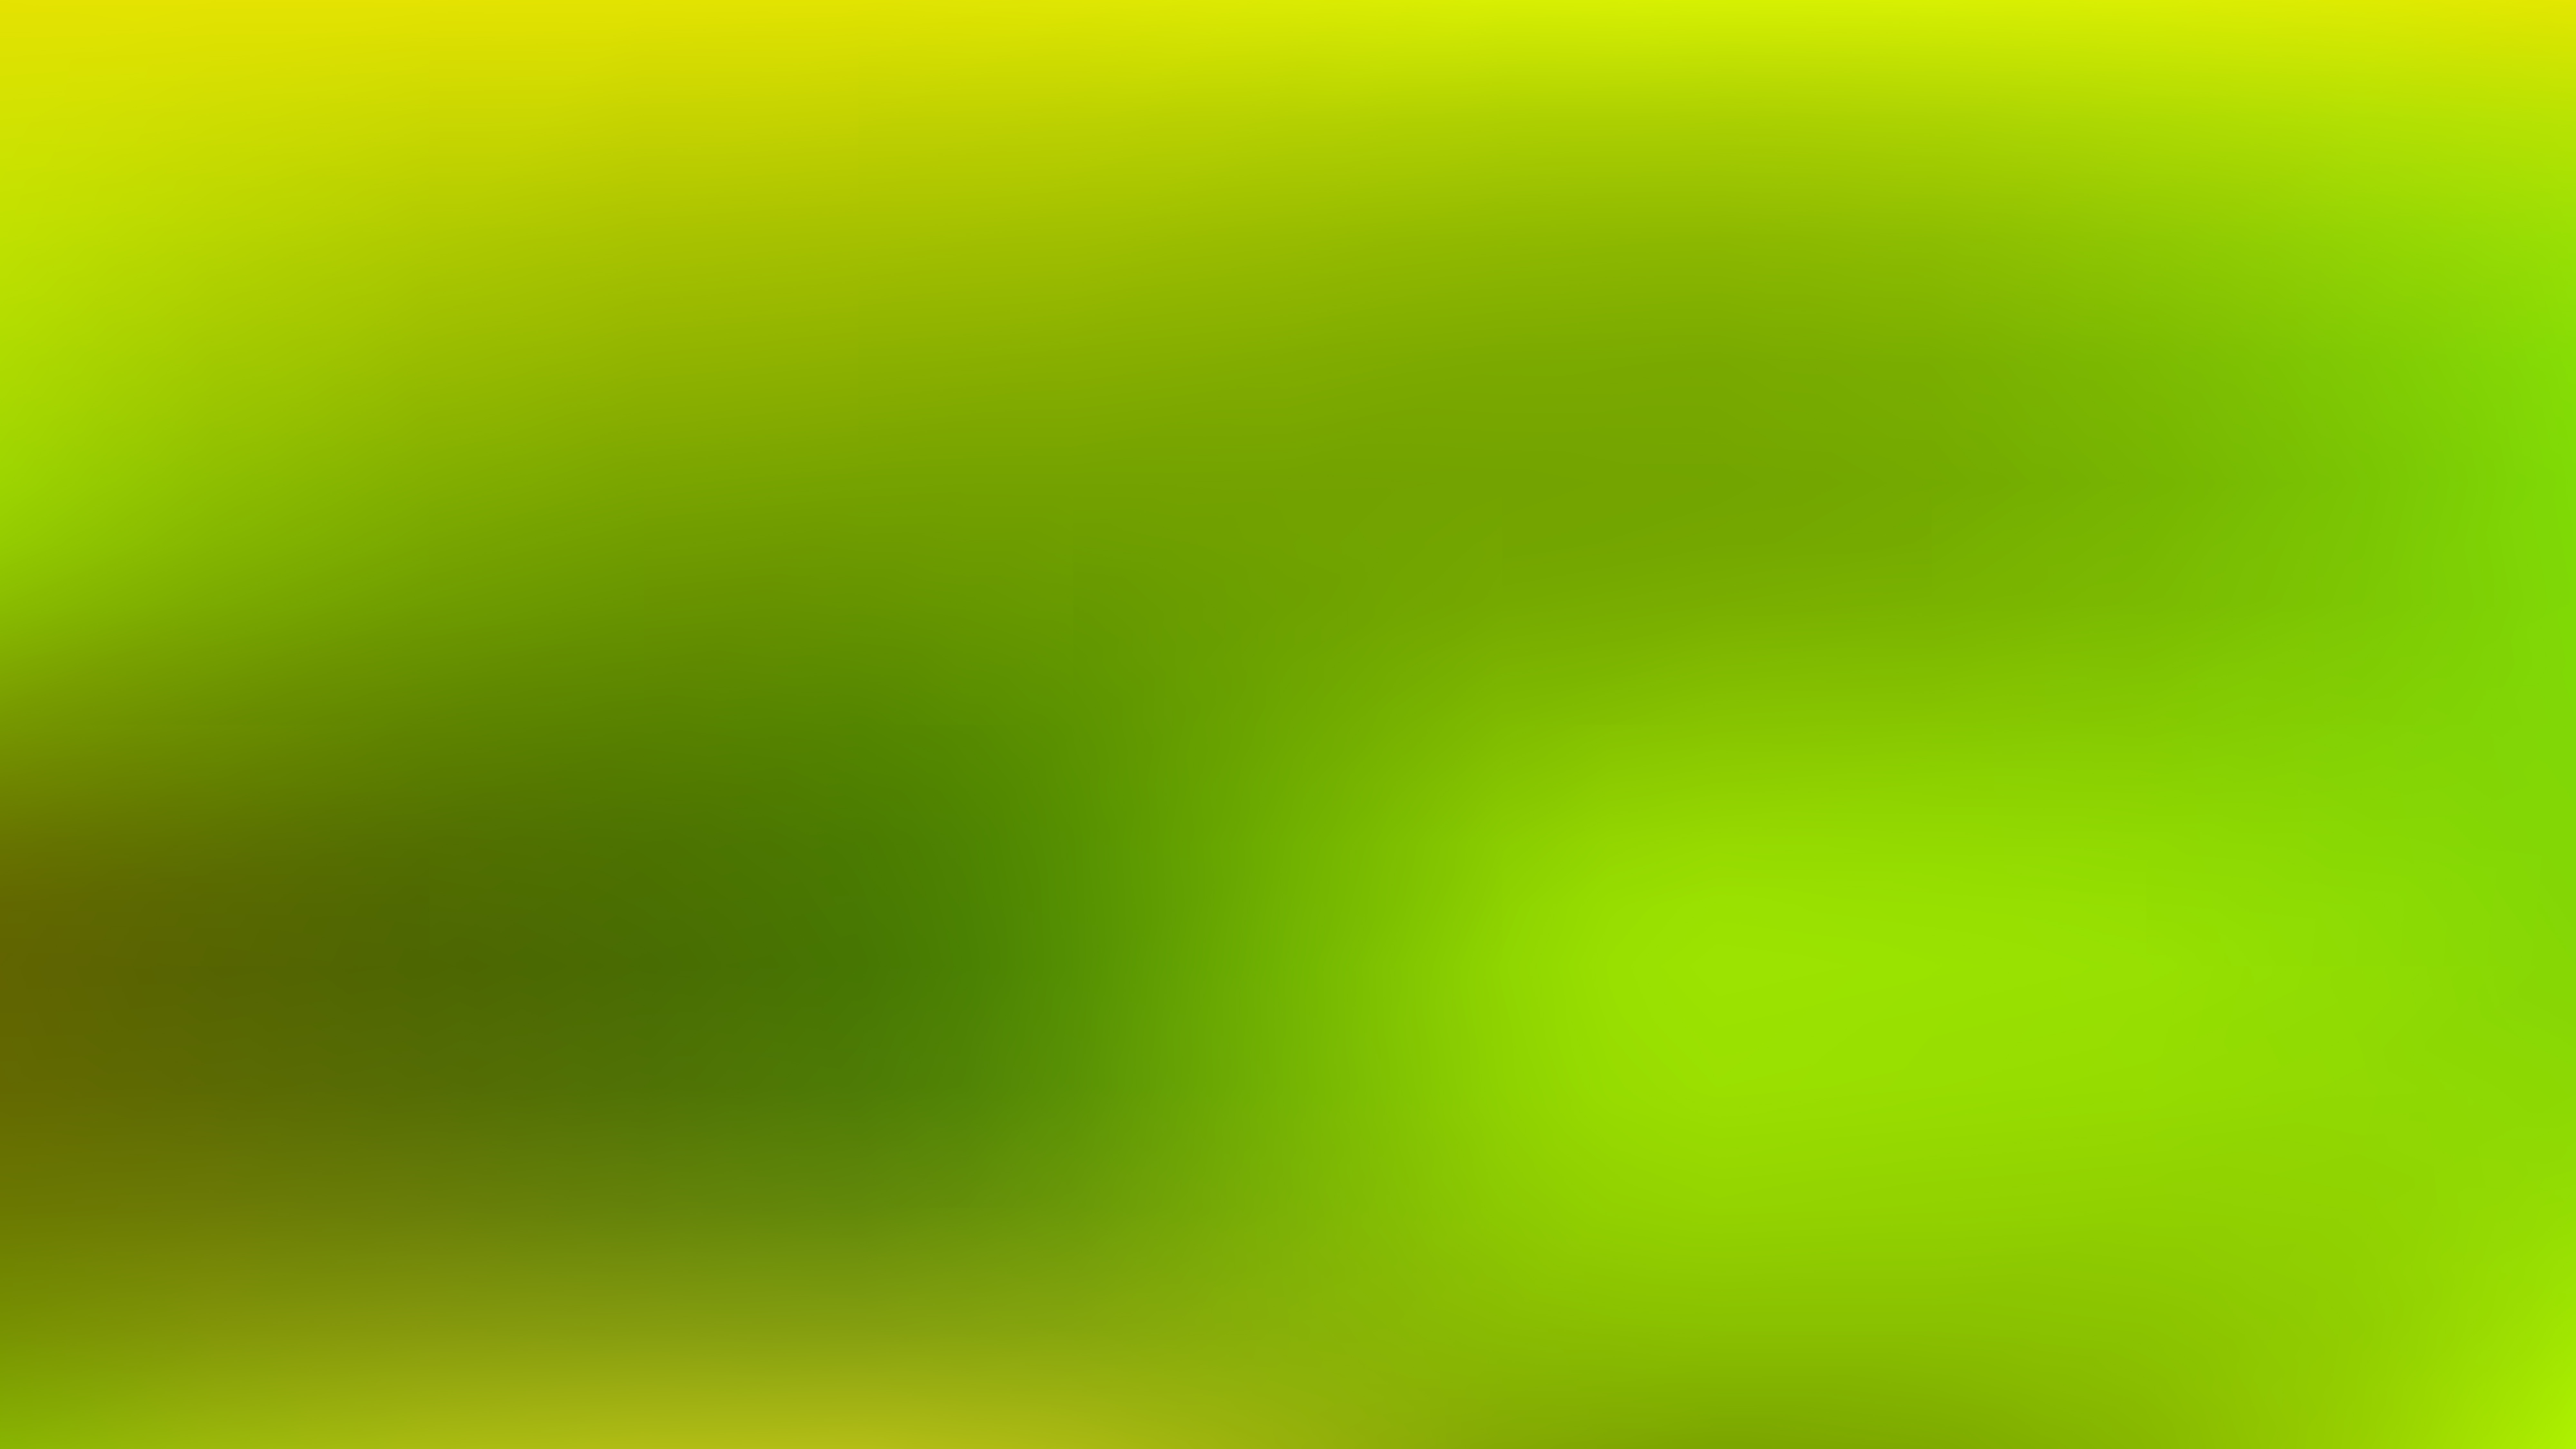 Green And Yellow Professional Background Image